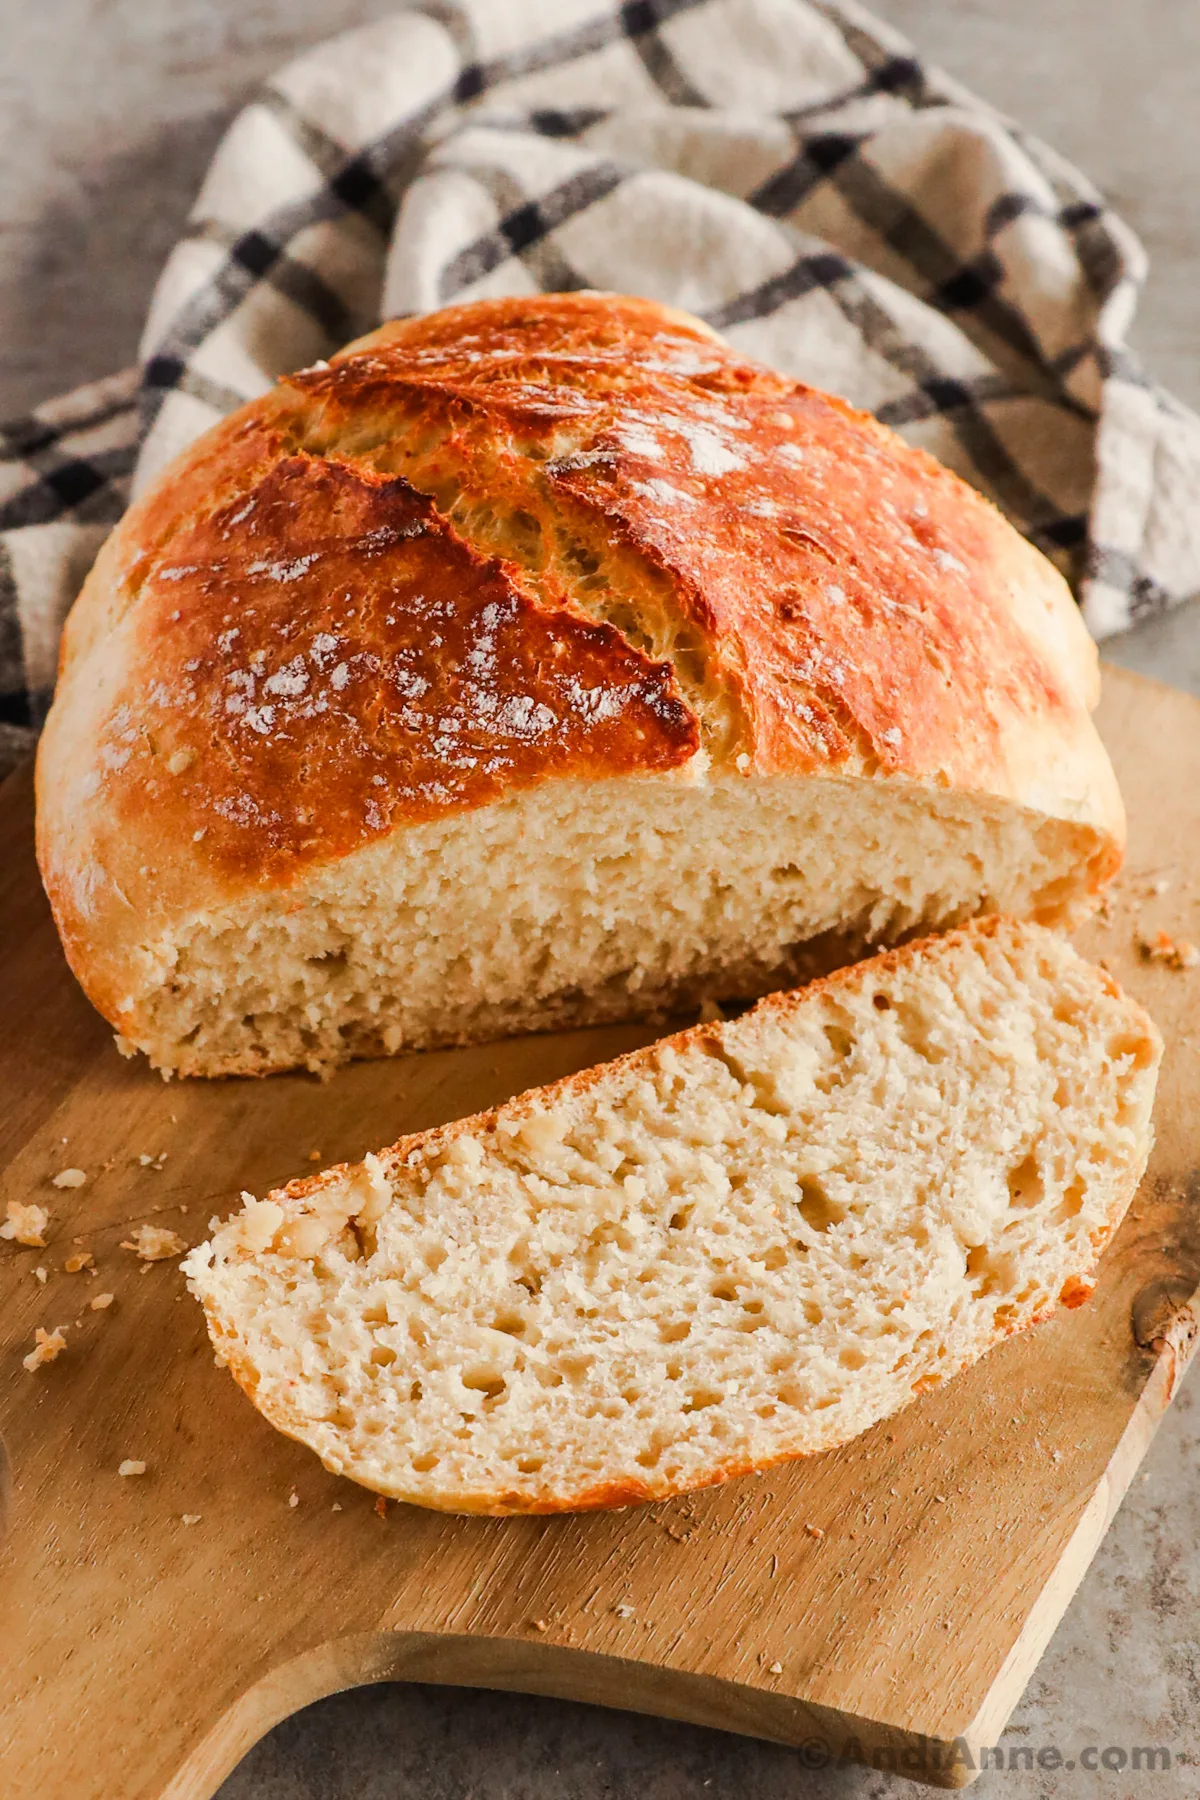 Homemade Dutch Oven Bread: Kneaded and No-Knead Methods - Kitchen Joy